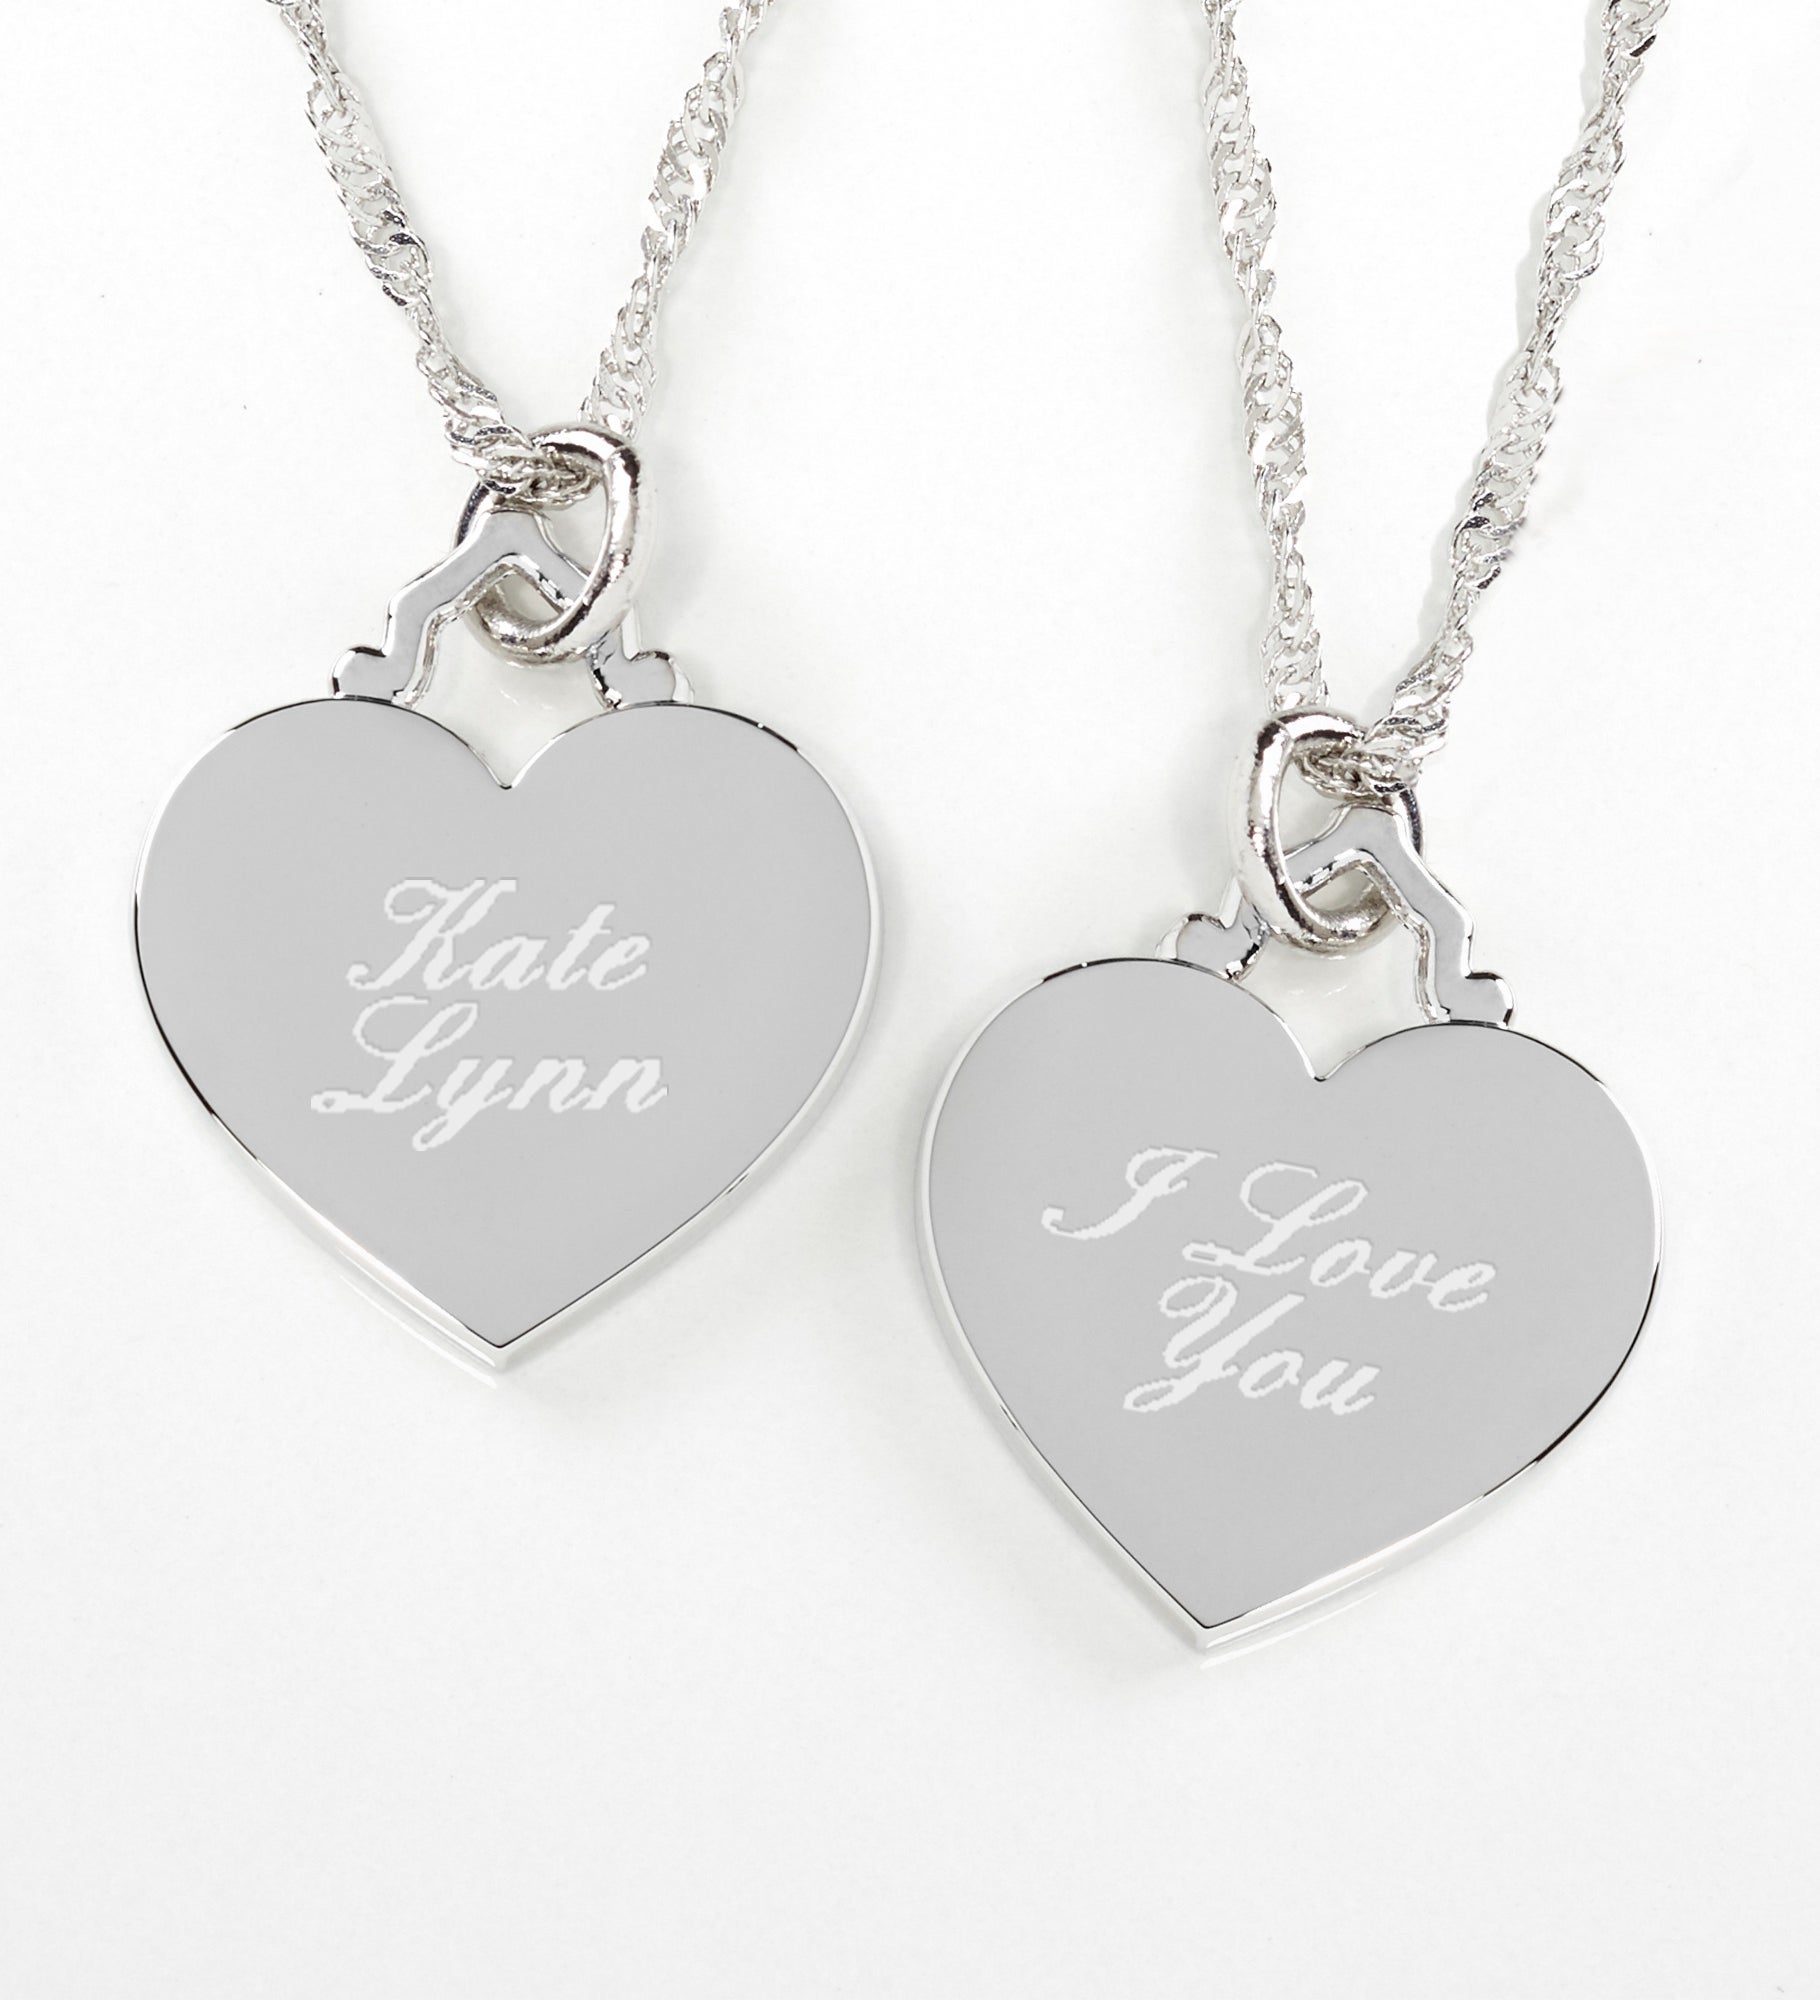 Custom Message Engraved Necklace